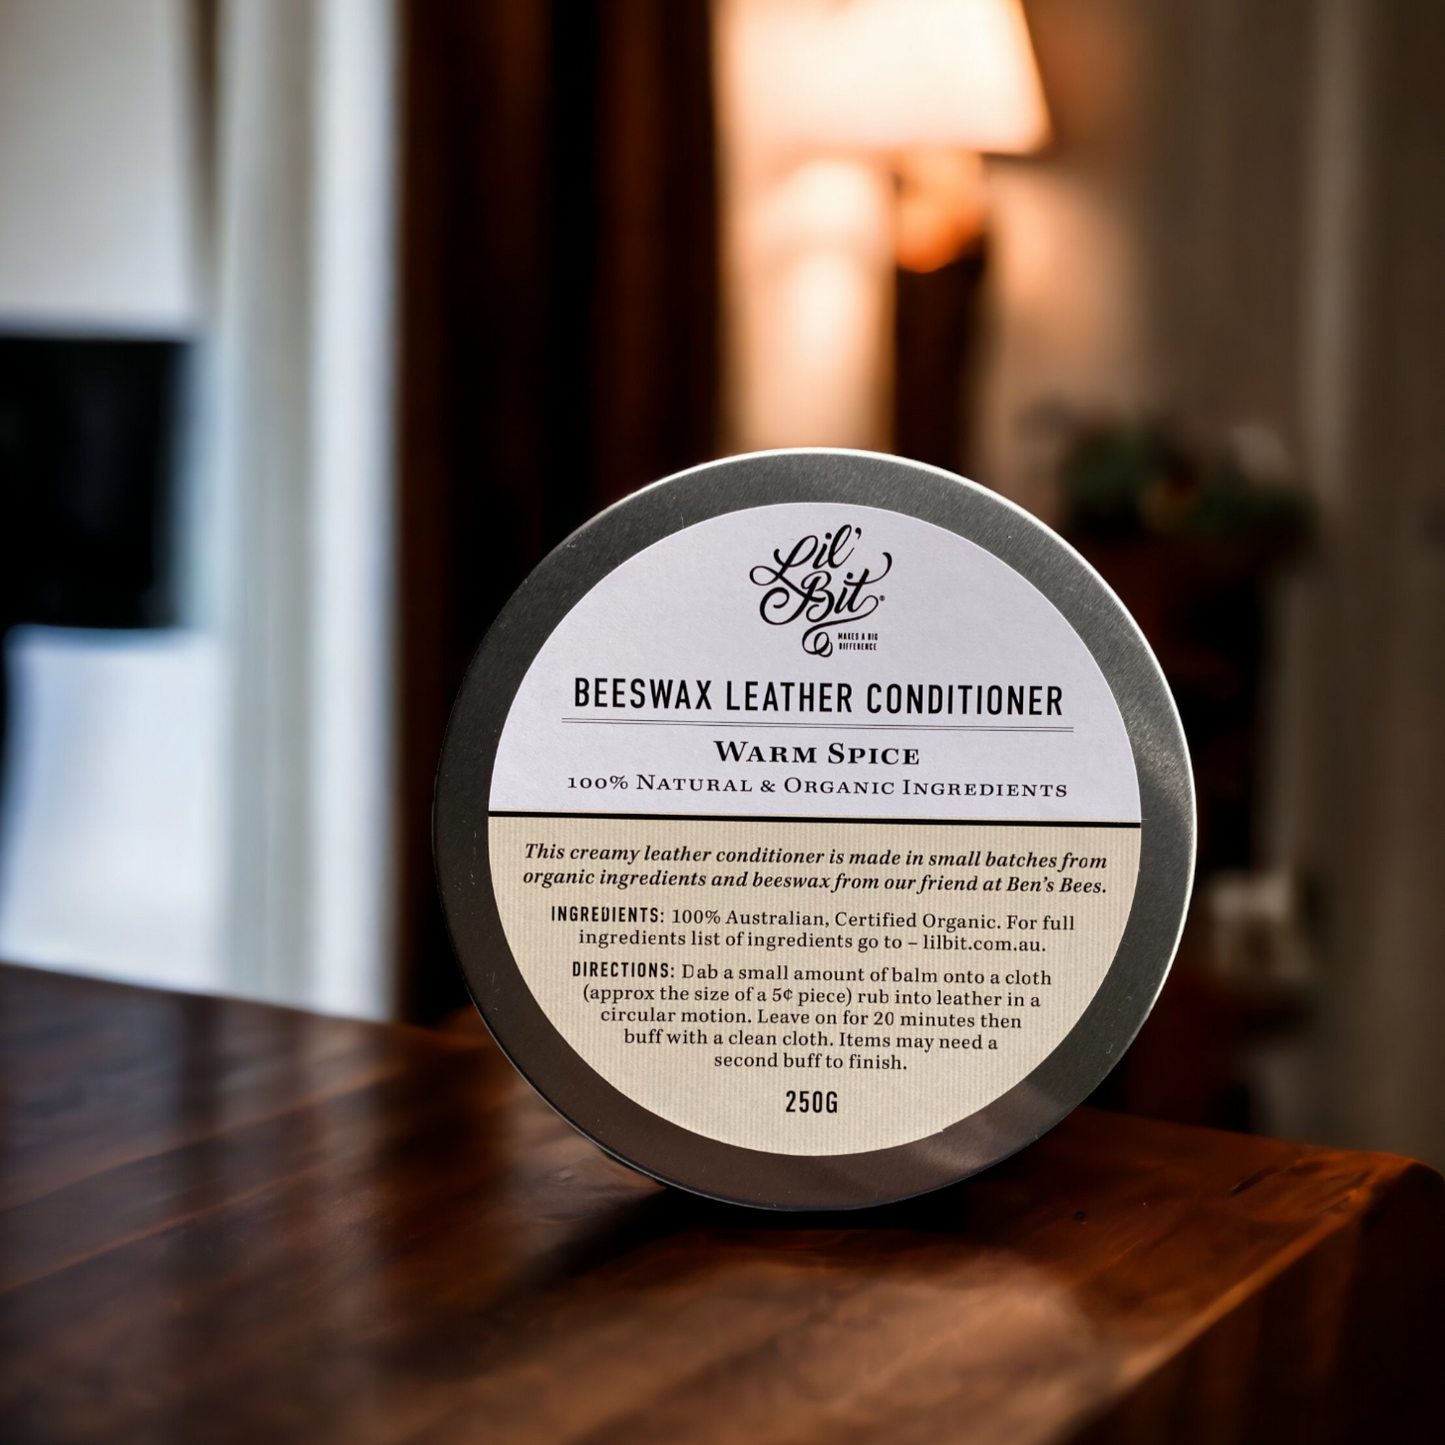 Warm Spice Beeswax Leather Conditioner 250g - Banish